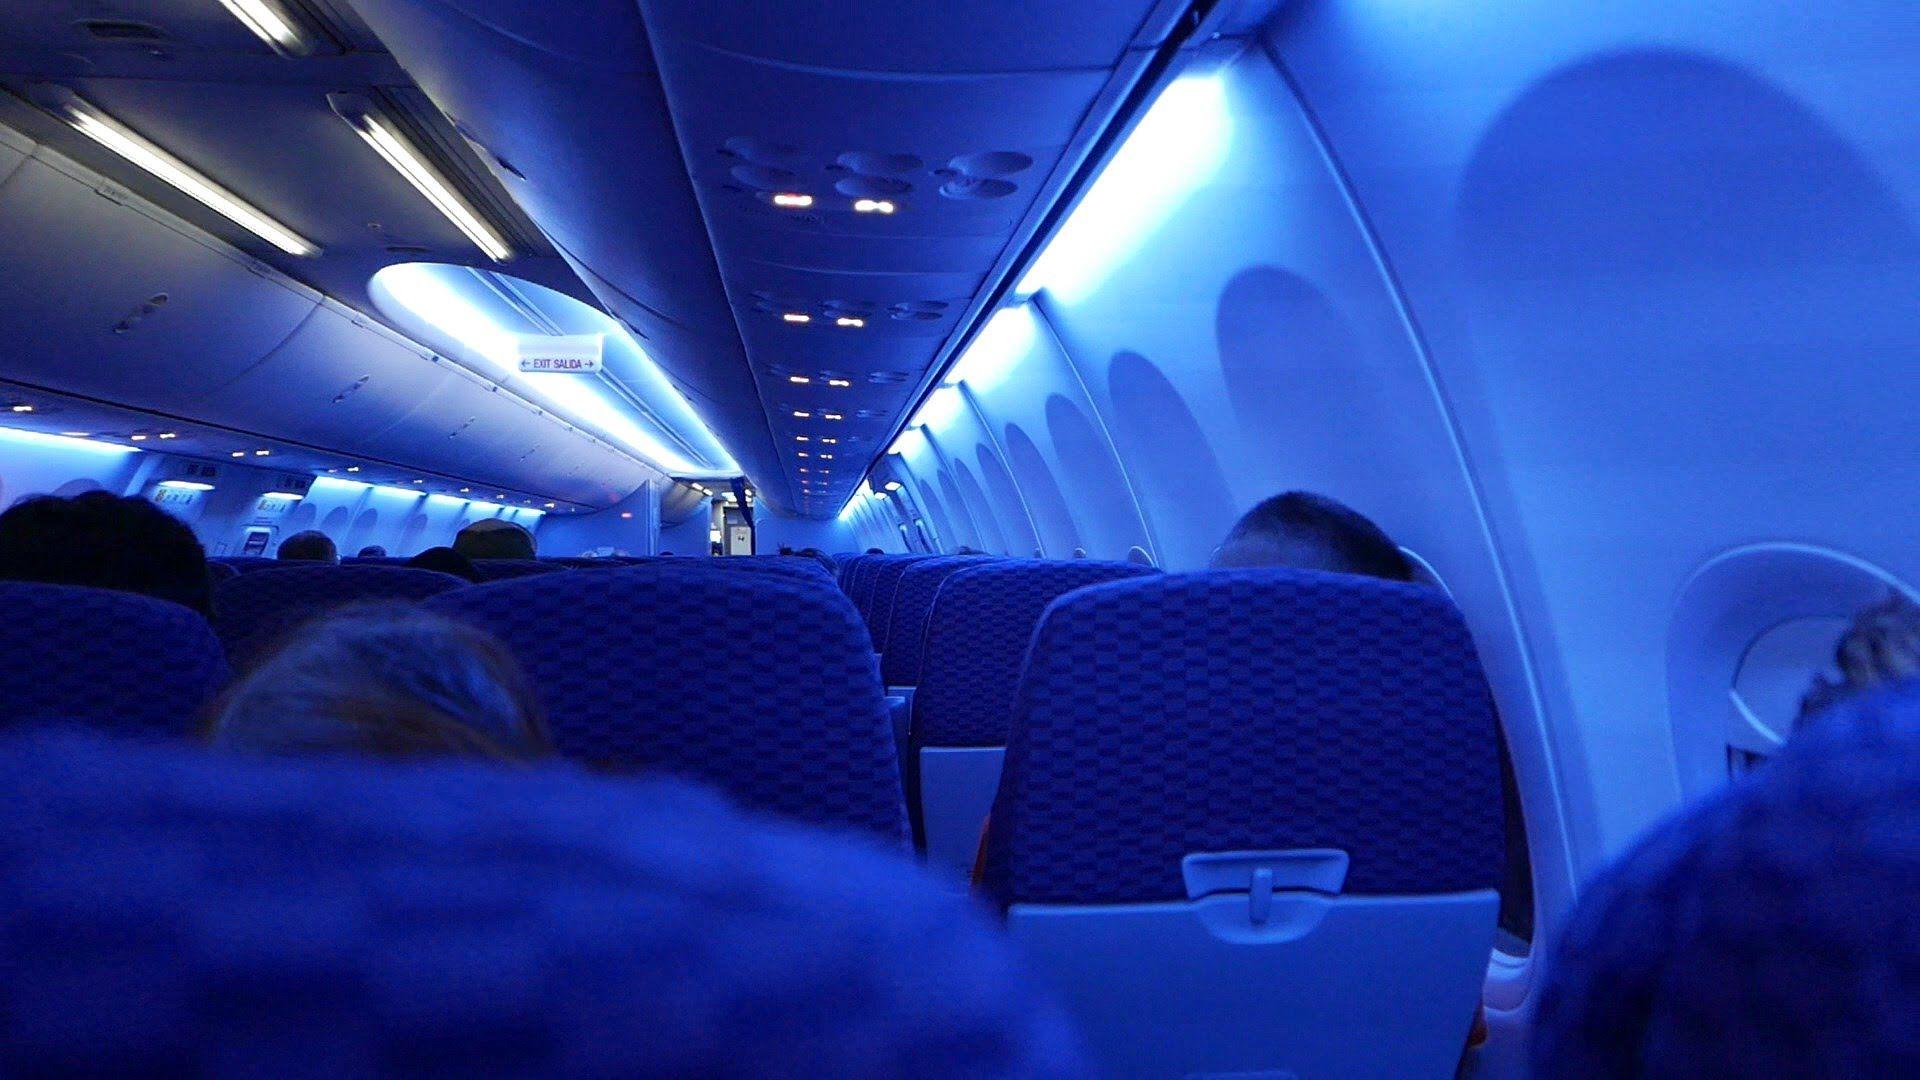 Airplane Take Off Inside View at Night on United Airlines Boeing 737